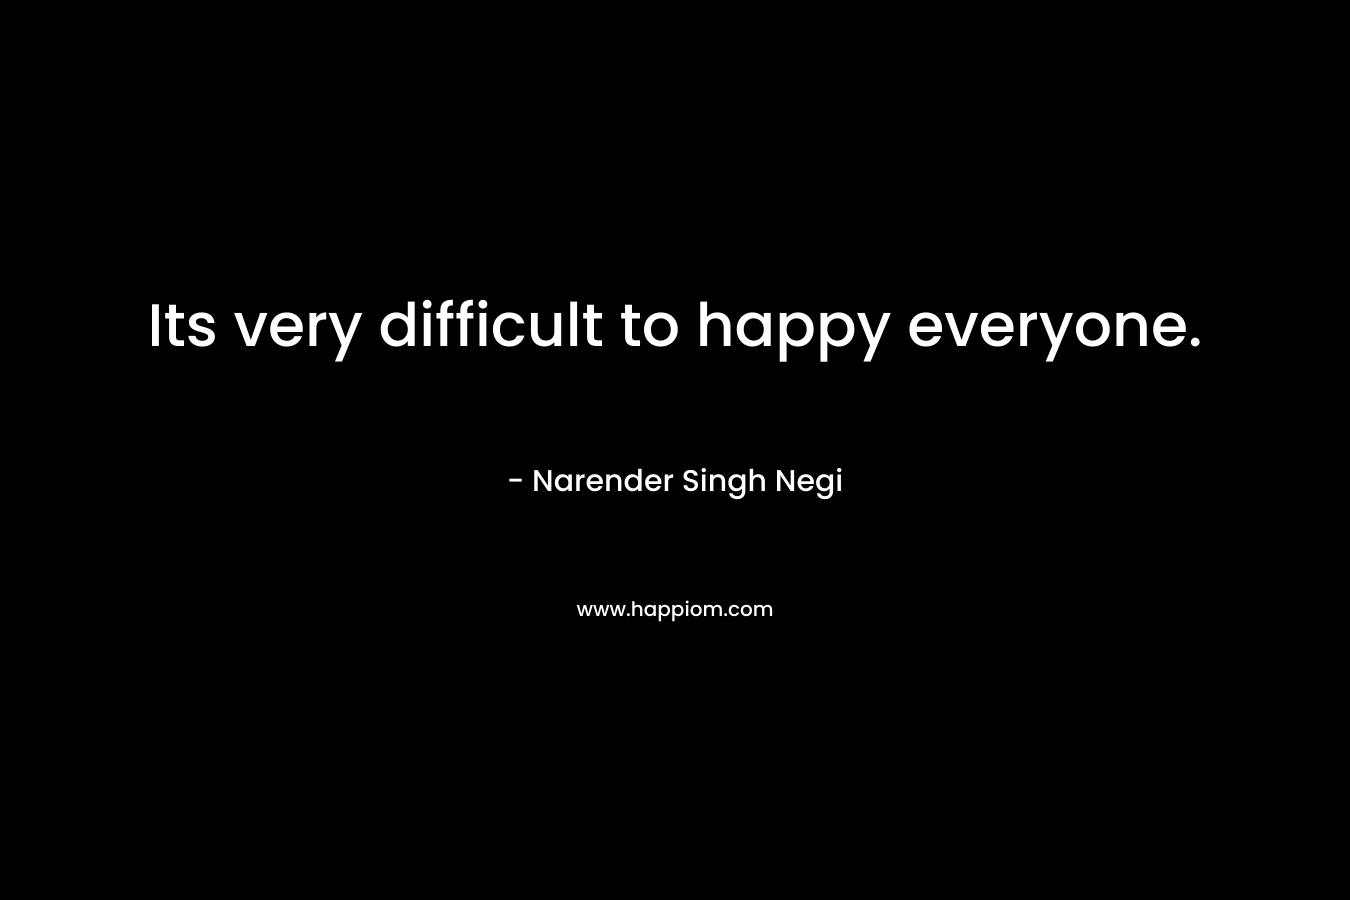 Its very difficult to happy everyone.